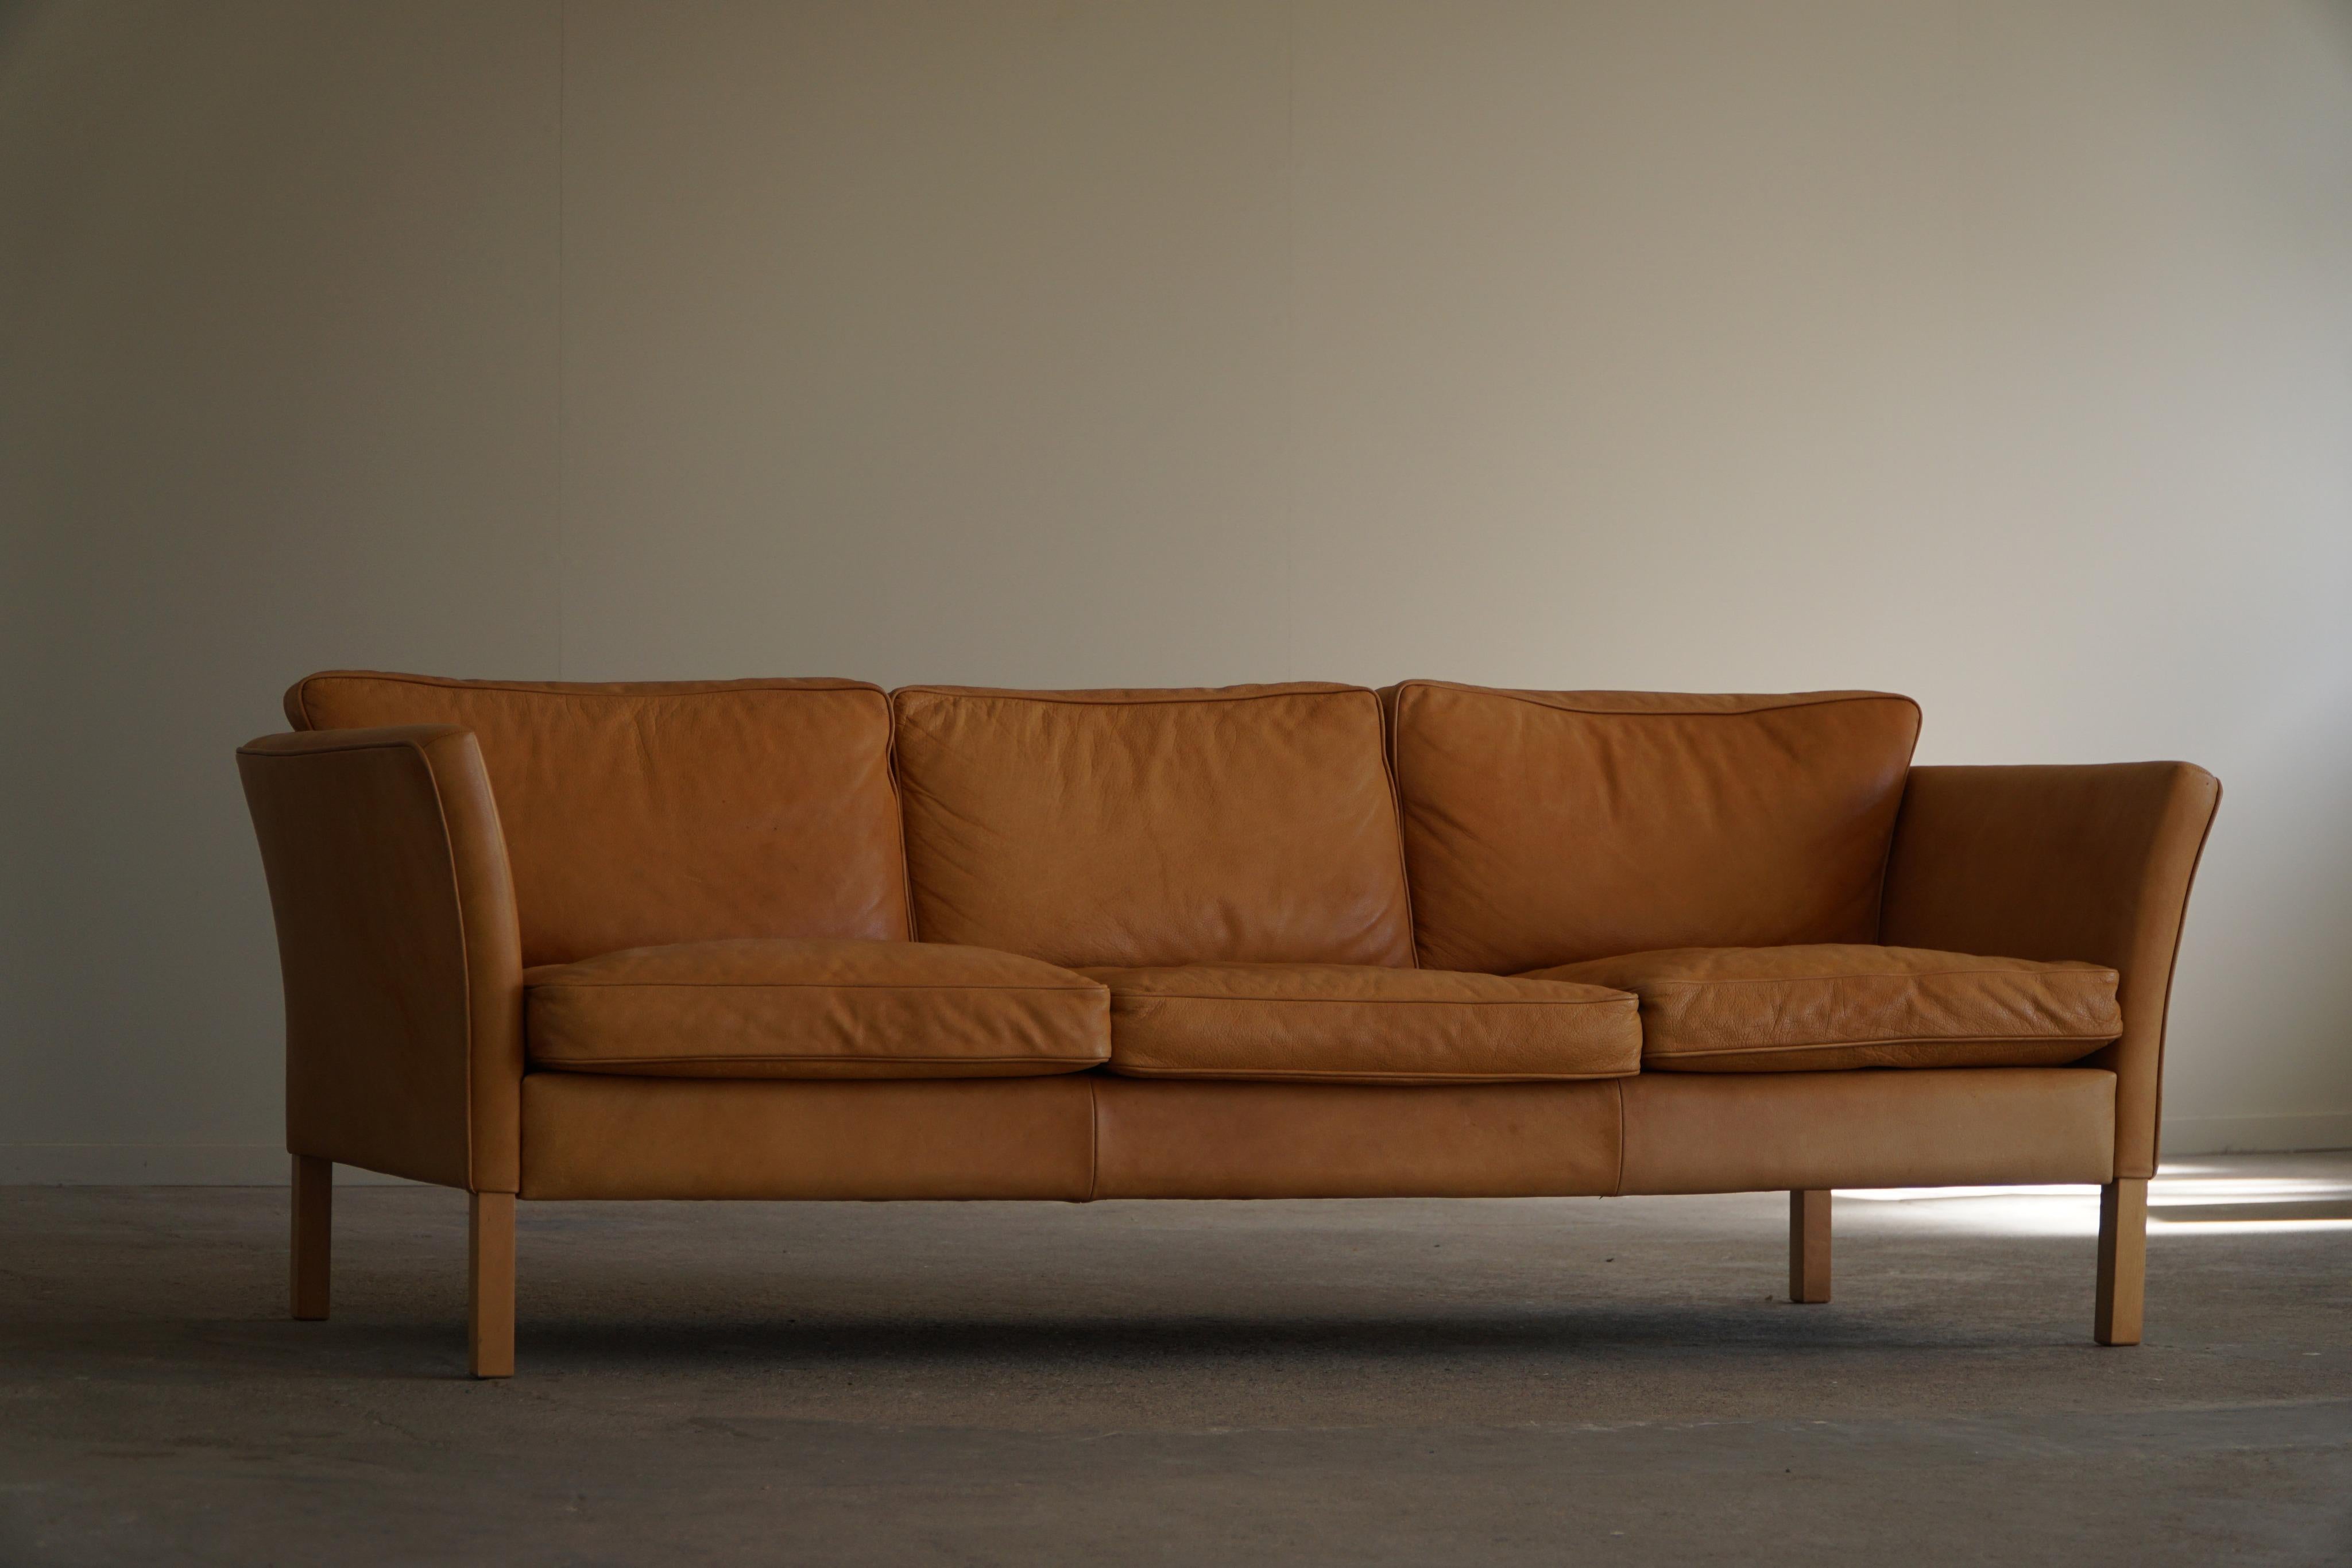 Danish Midcentury Stouby 3-Seater Sofa in Cognac Brown Leather, Made in 1970s For Sale 15